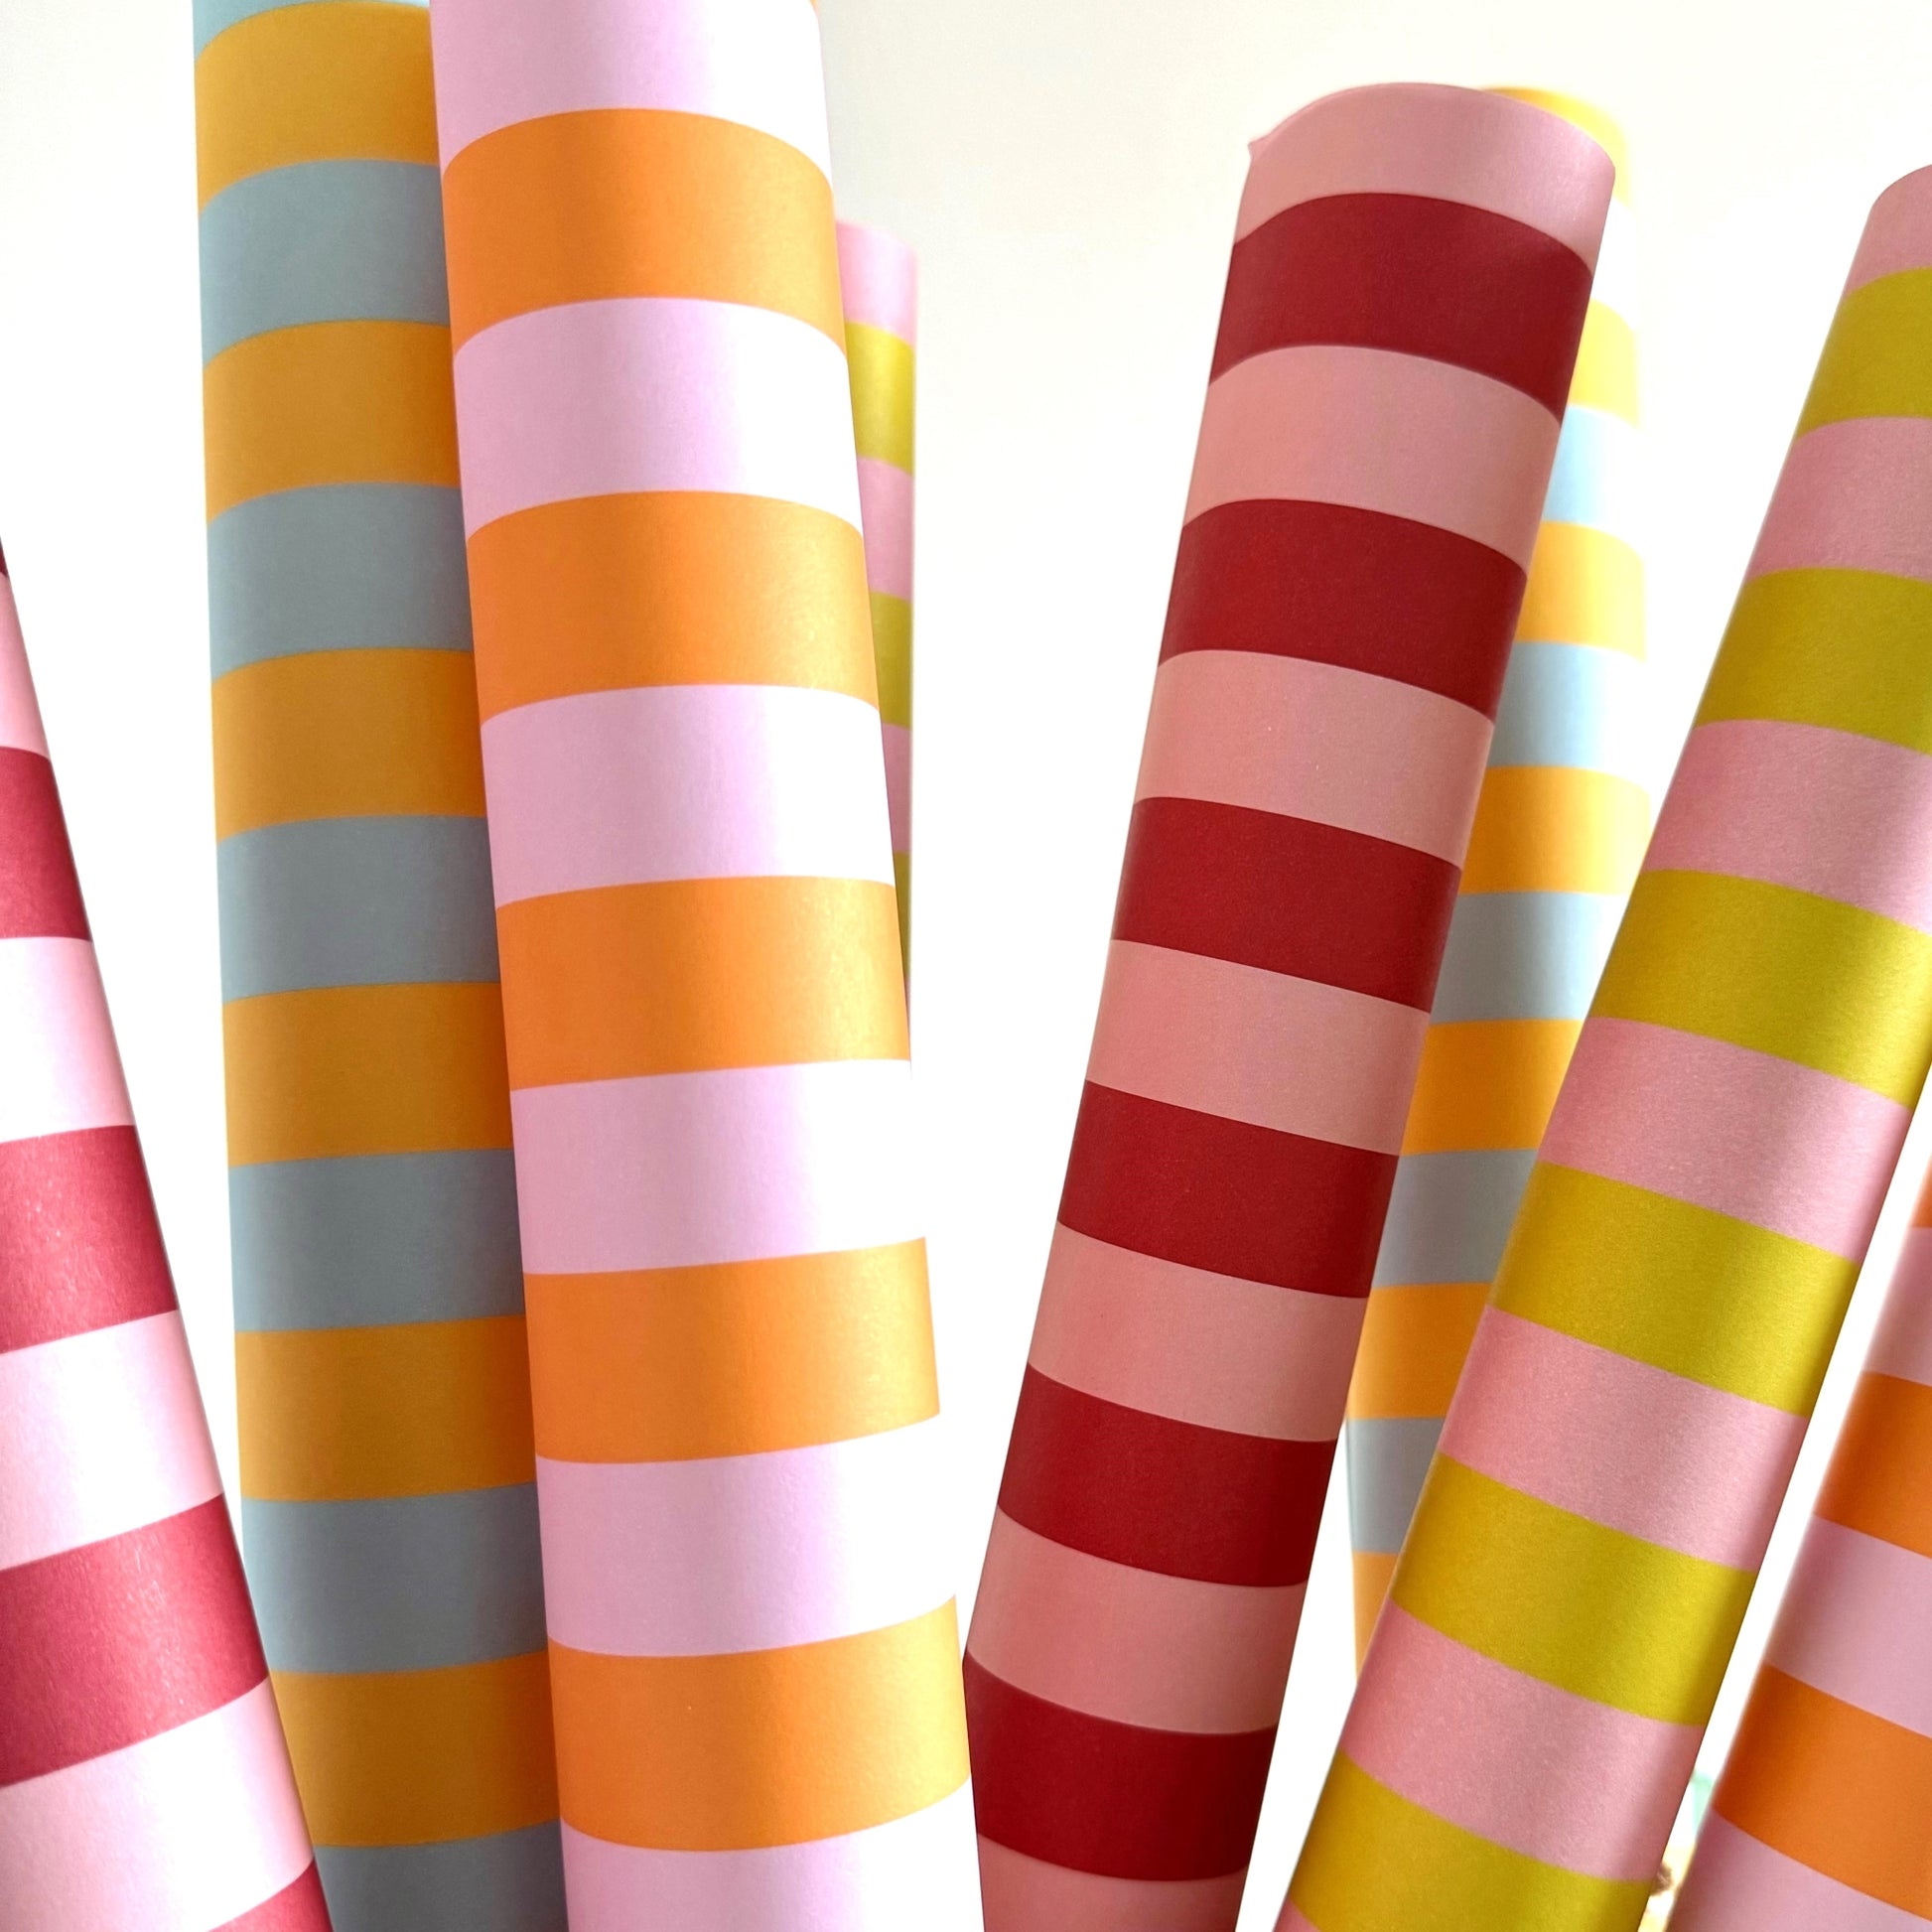 wide classic stripe wrapping paper in red and pink by Heather Evelyn. Pictured rolled with other striped patterned papers